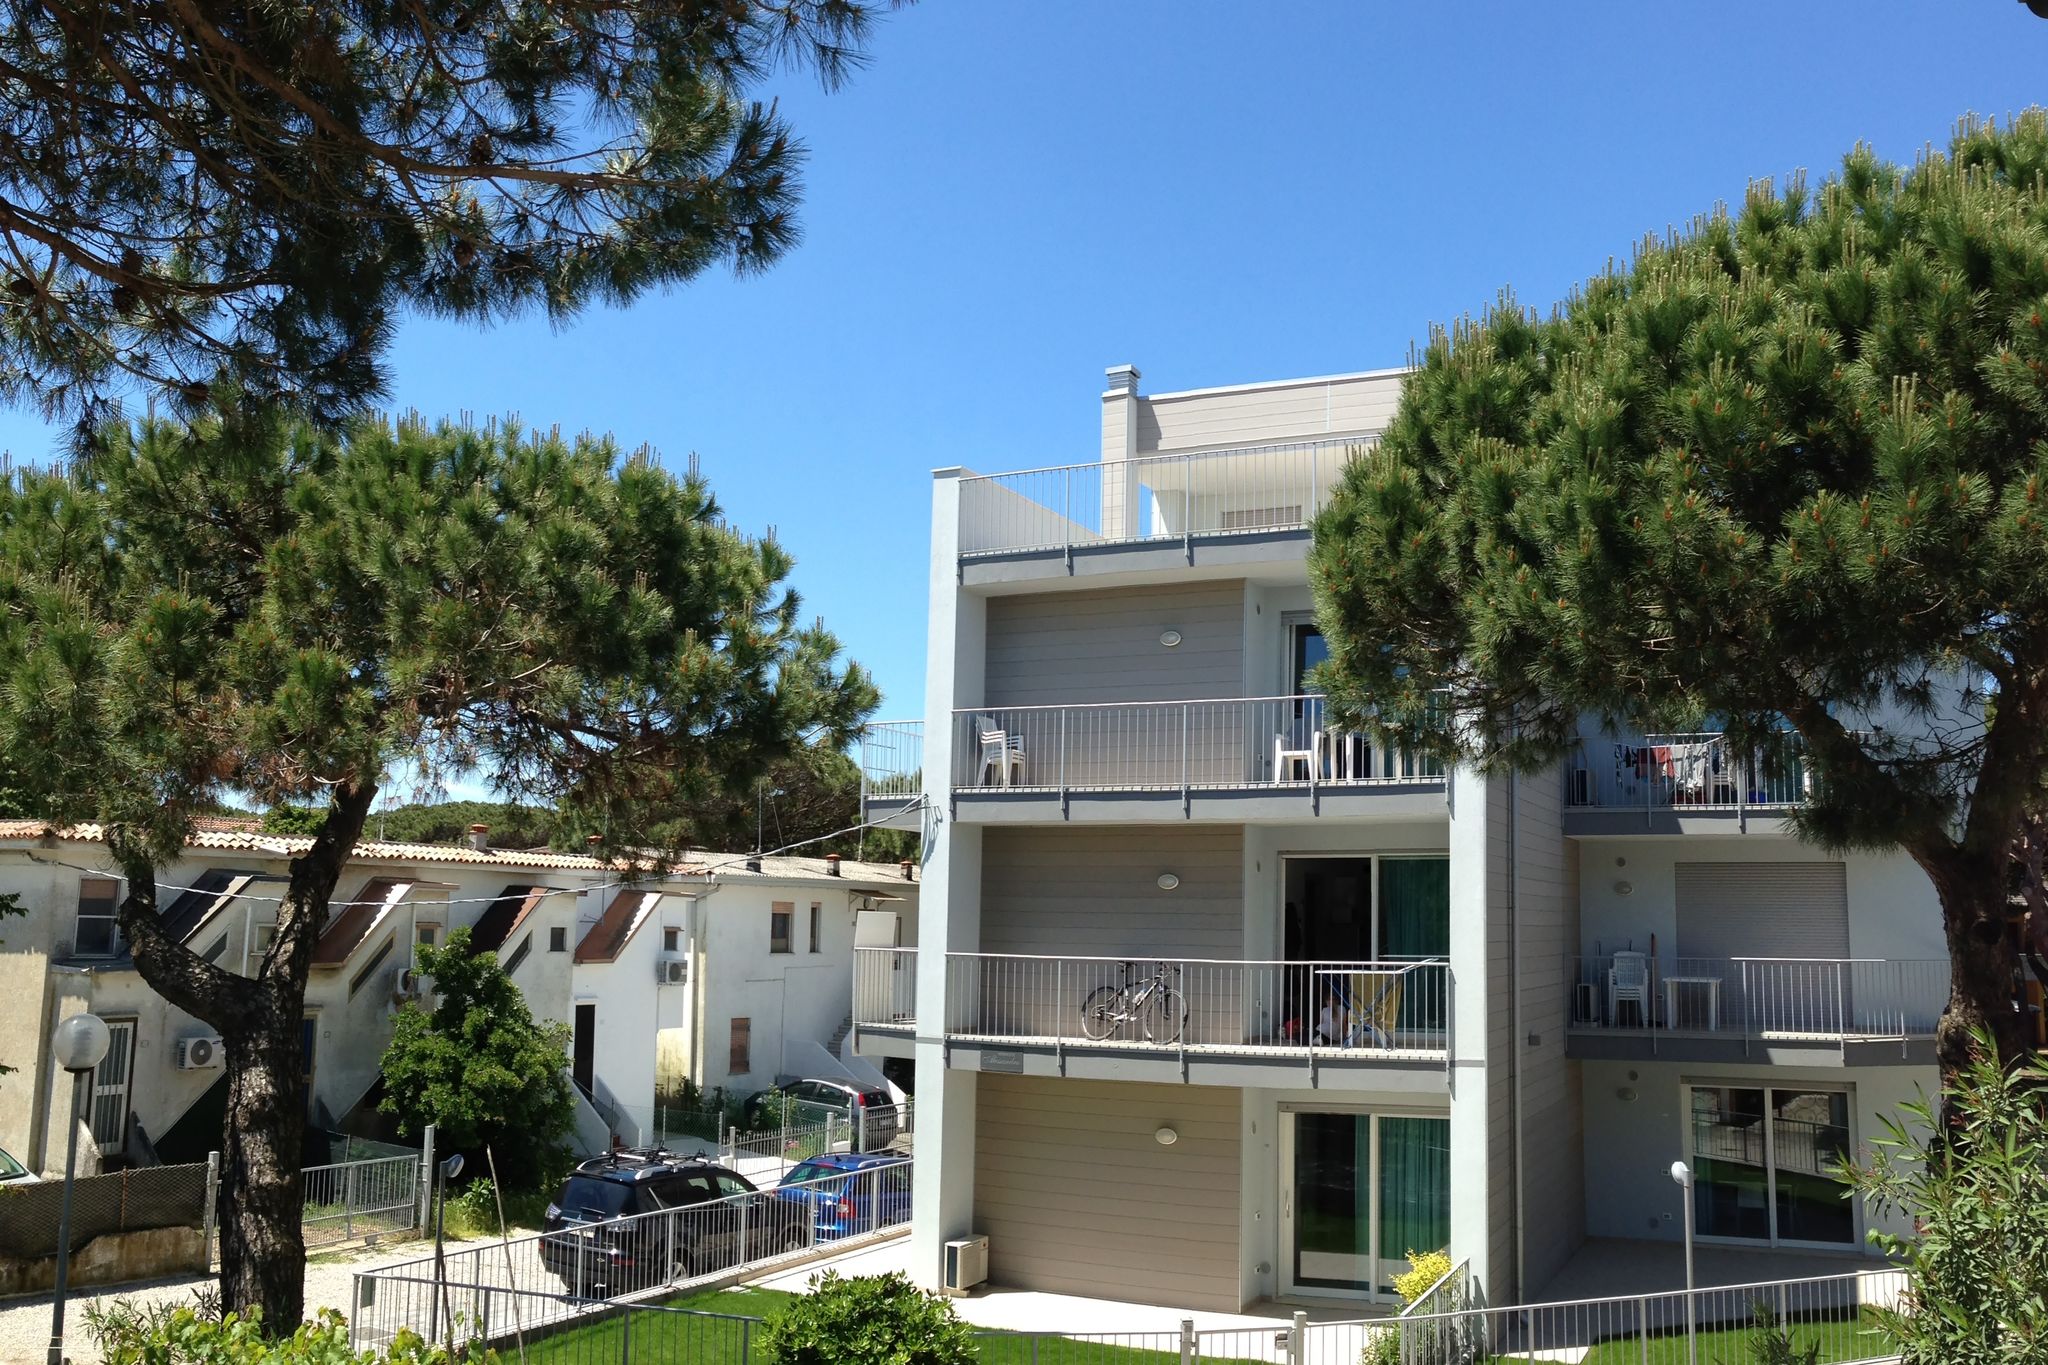 Modern holiday home close to sea front, in Rosolina Mare, near Venice